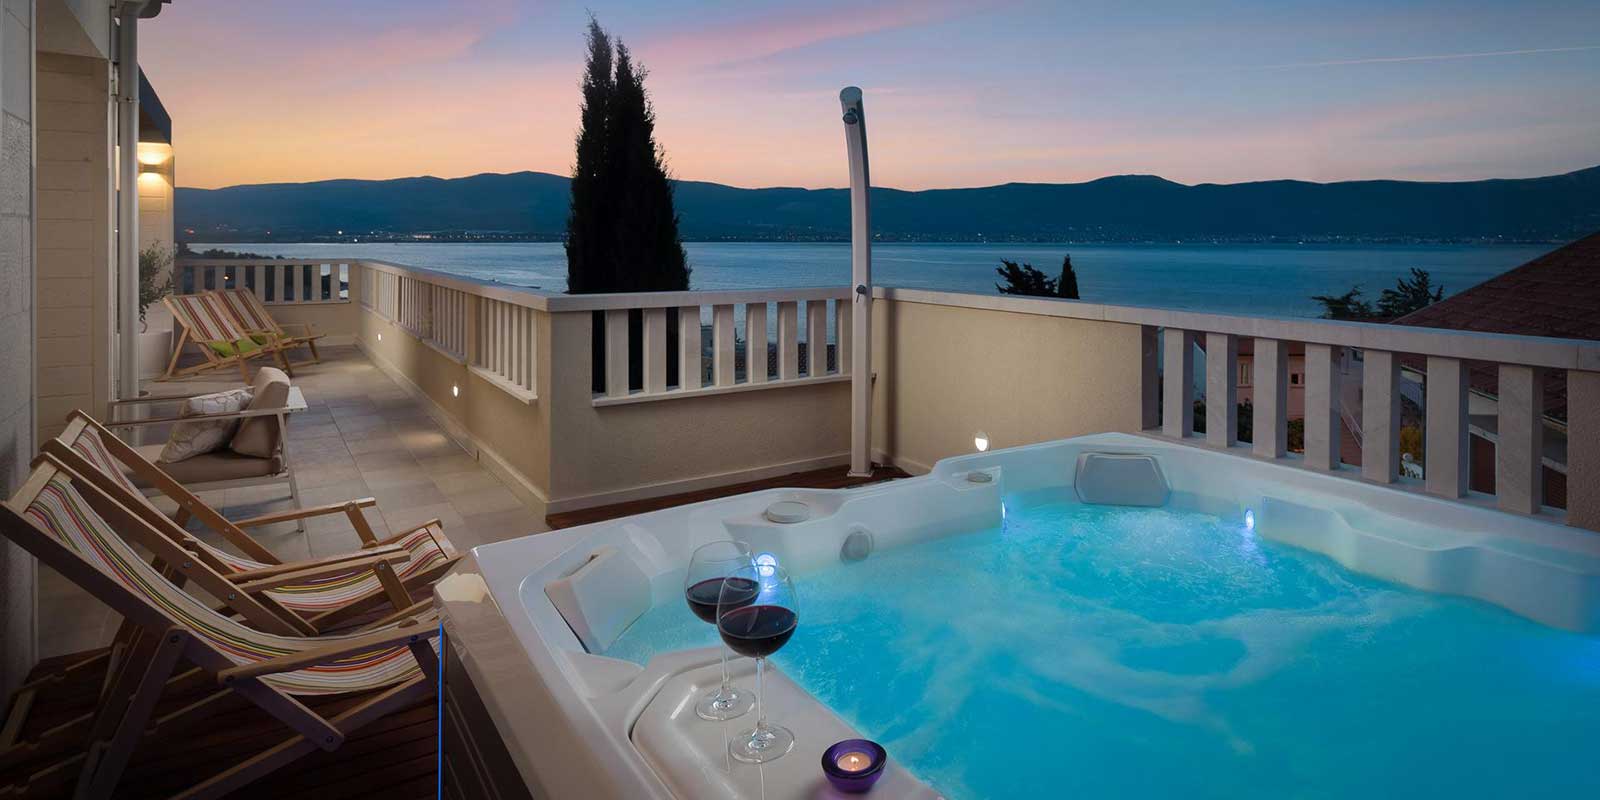 jacuzzi on the terrace at sunset